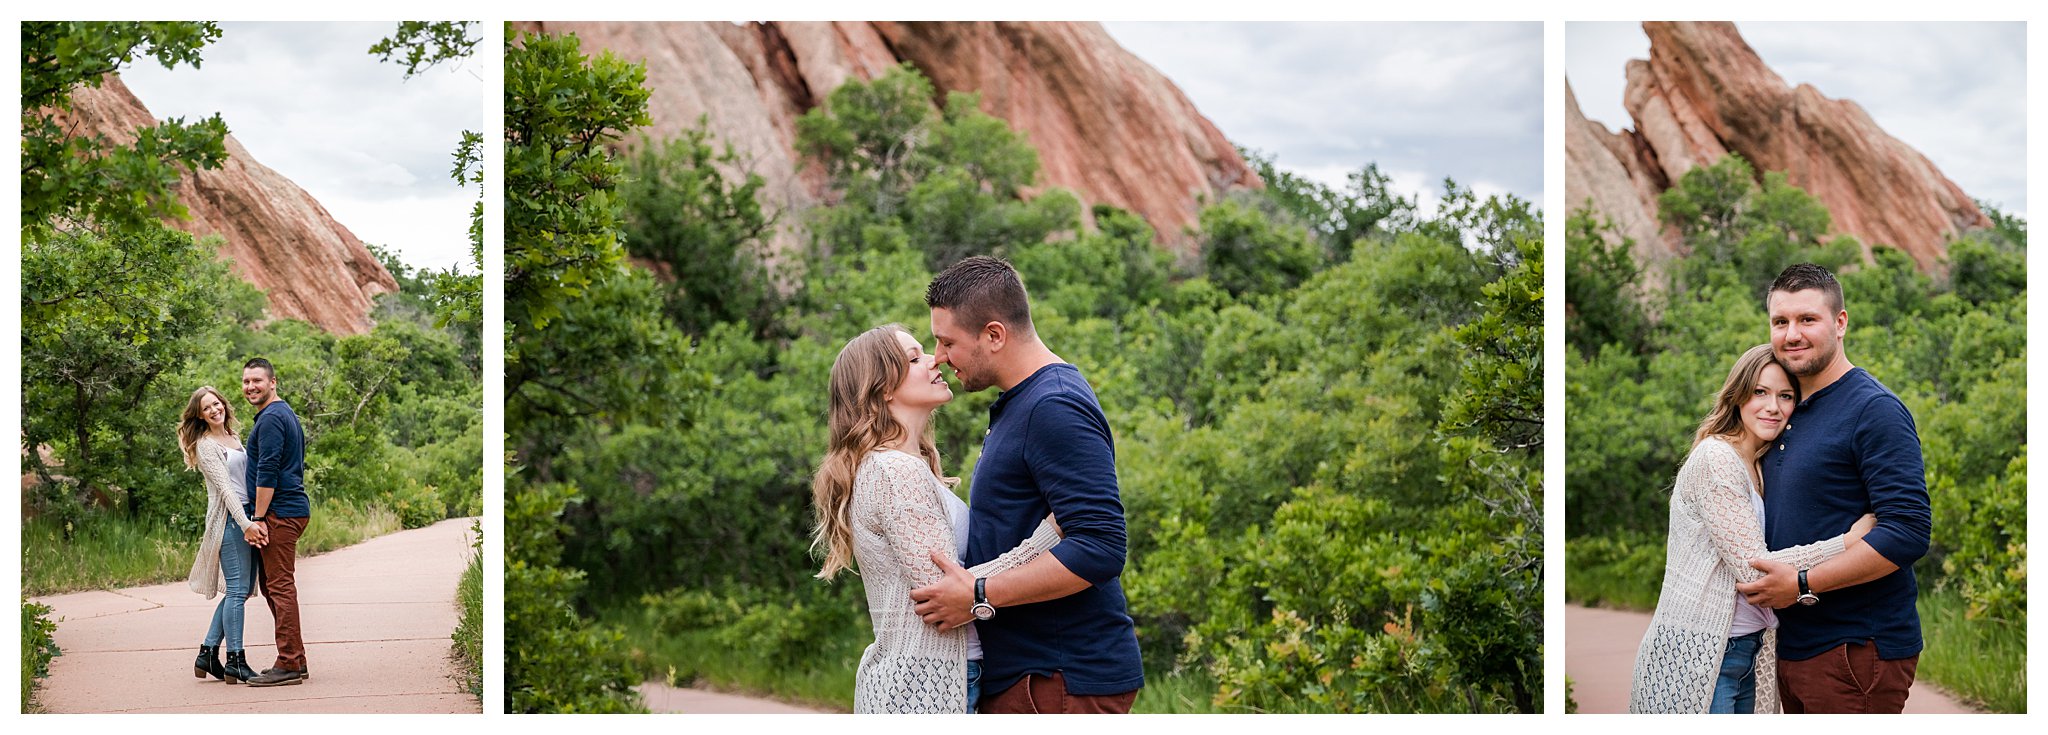 Couple poses for engagement session in front of lush green trees and red rocks